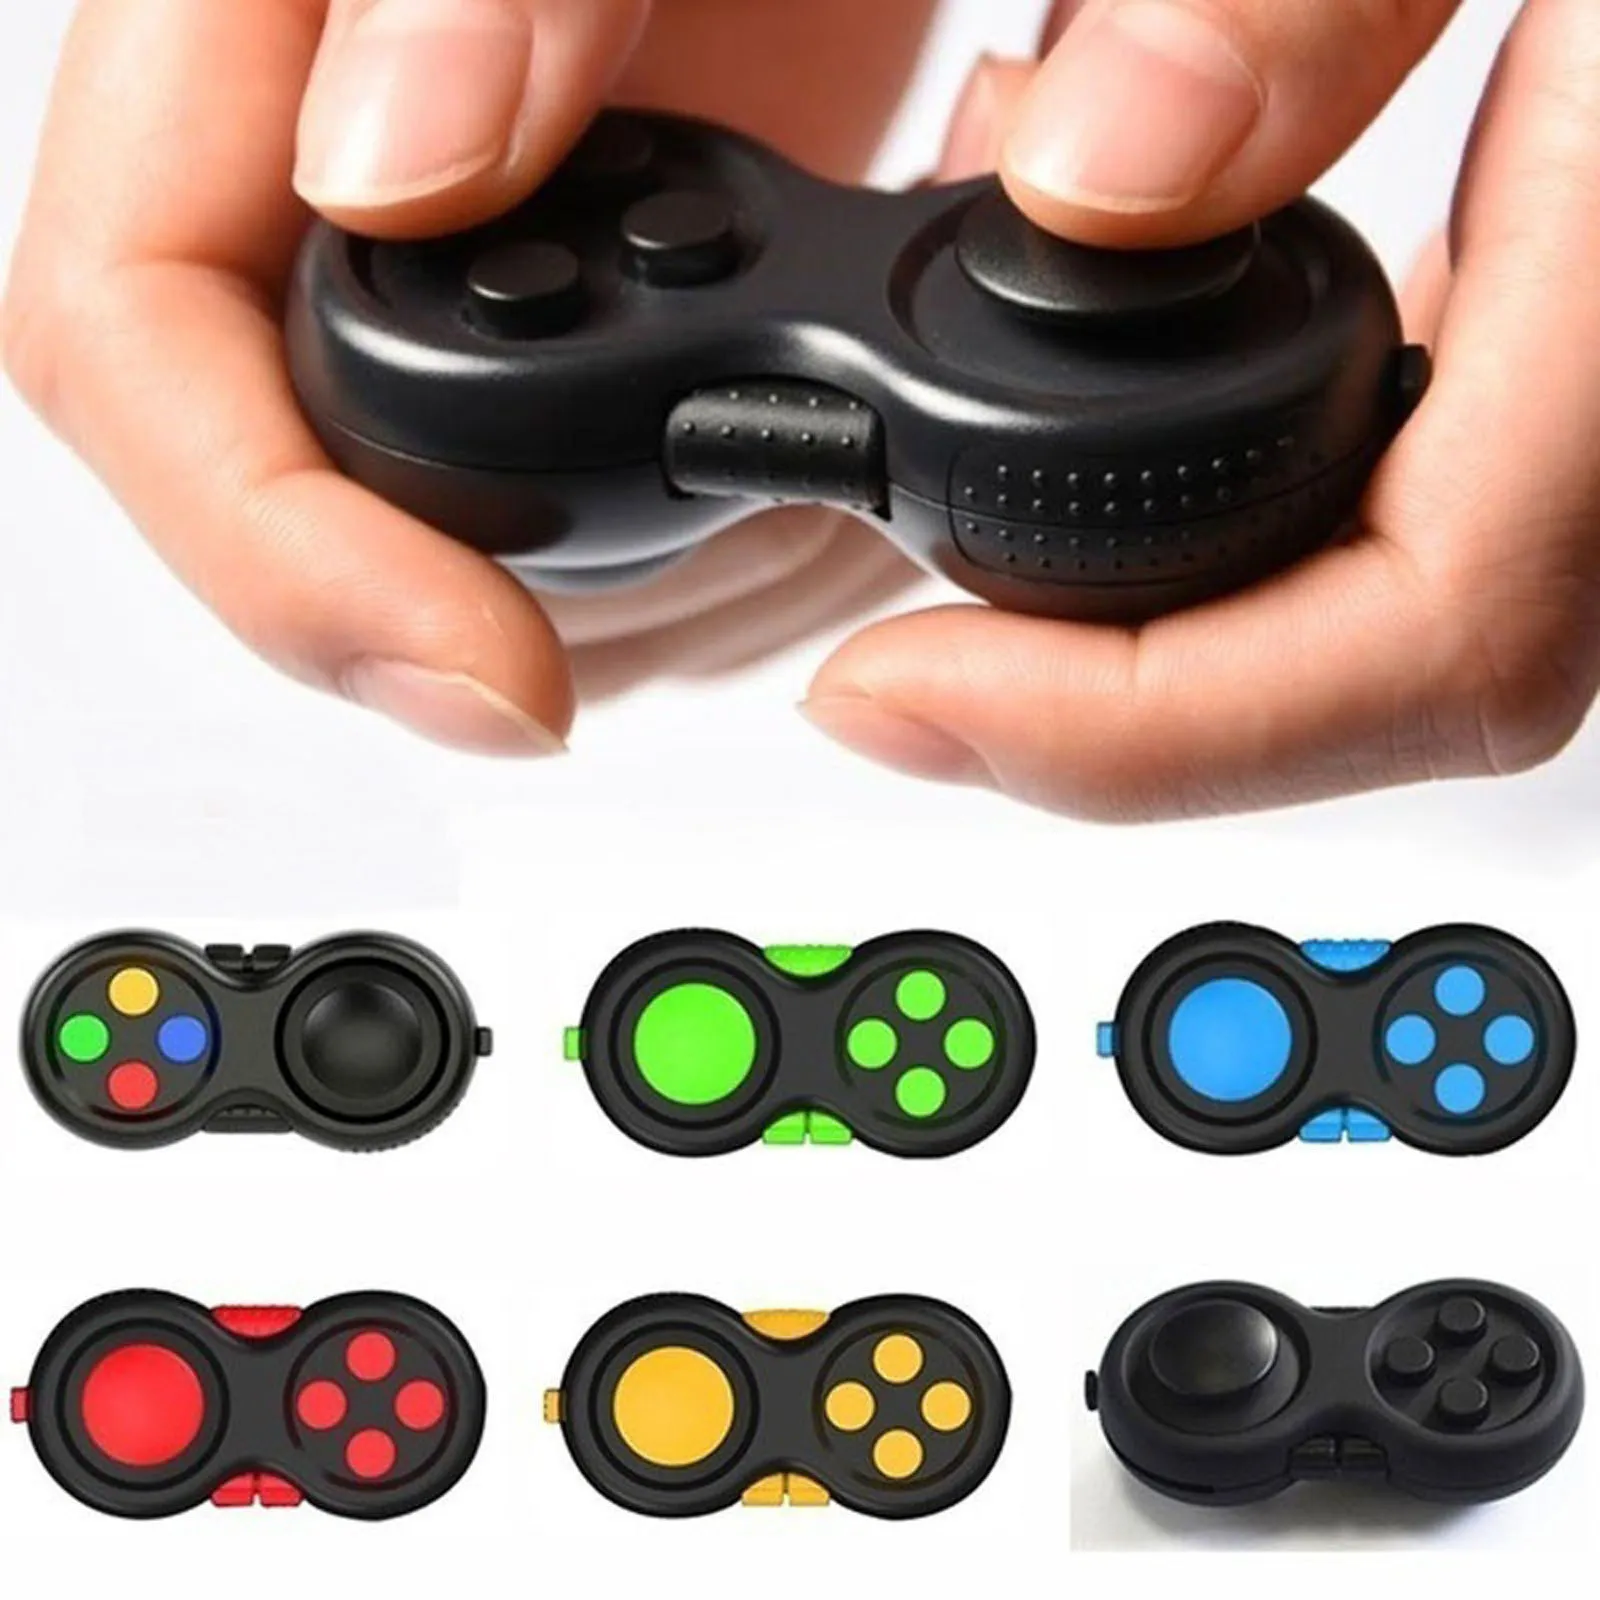 

Decompression Gamepad Relieve Stress And Anxiety Sensory Toy Adults Kids Hand Hot Interactive Toys juguete antiestres niÃ±os c1